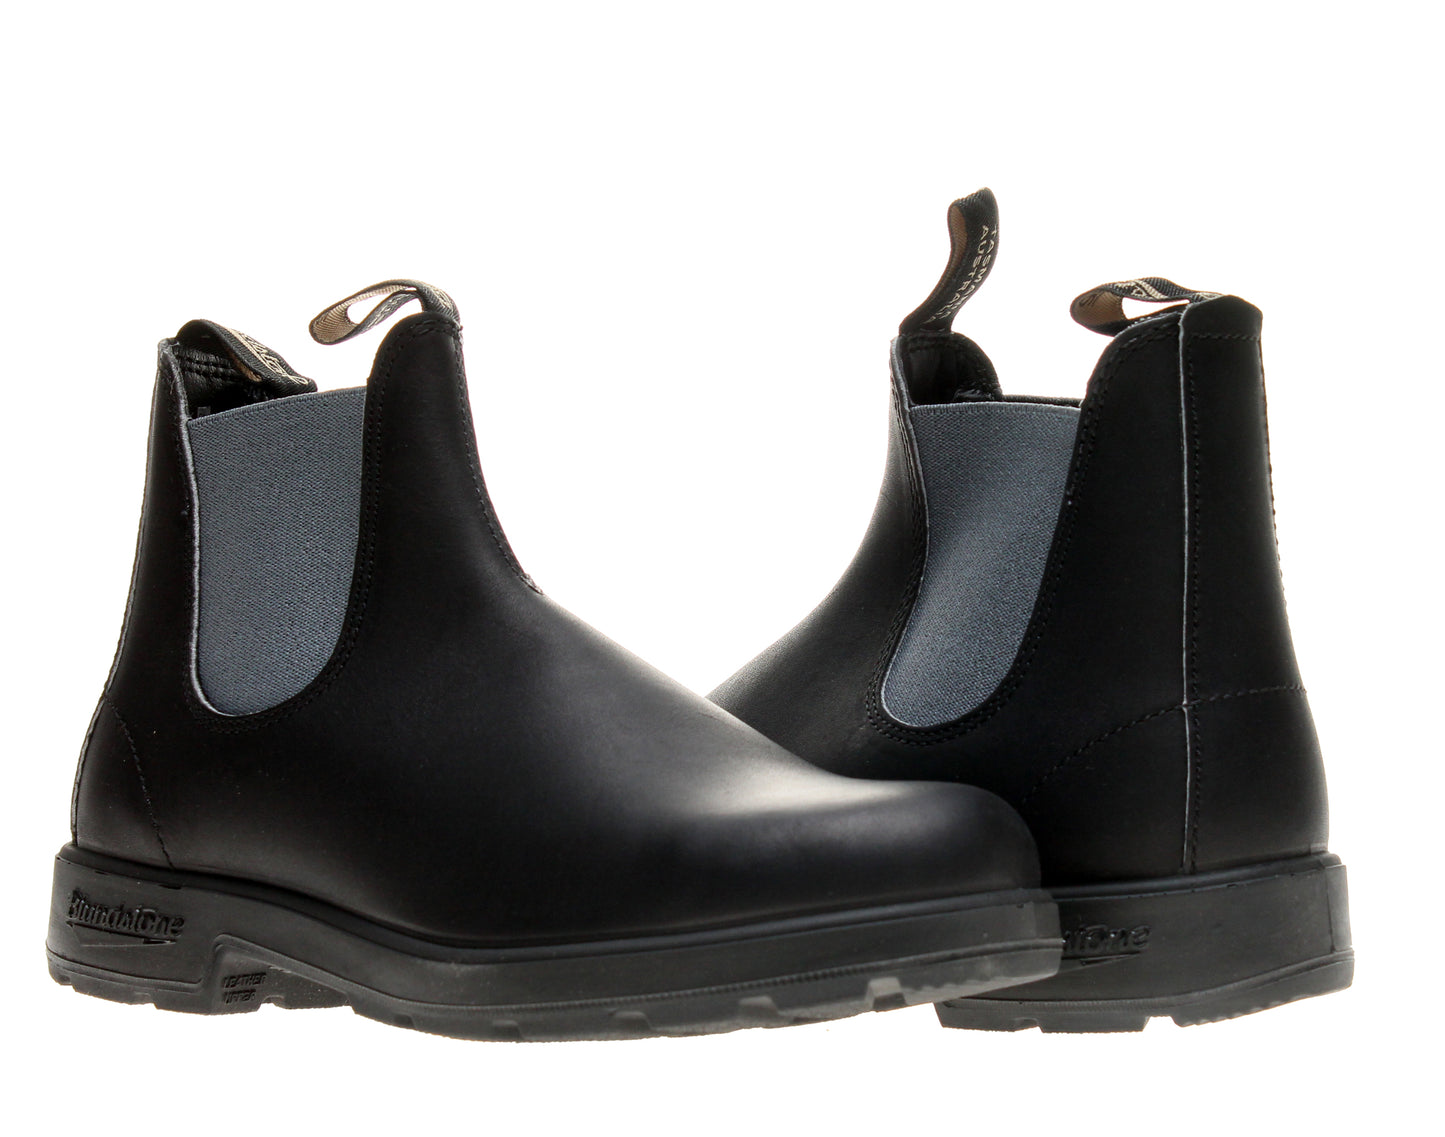 Blundstone 577 Pull-On Men's Chelsea Boots